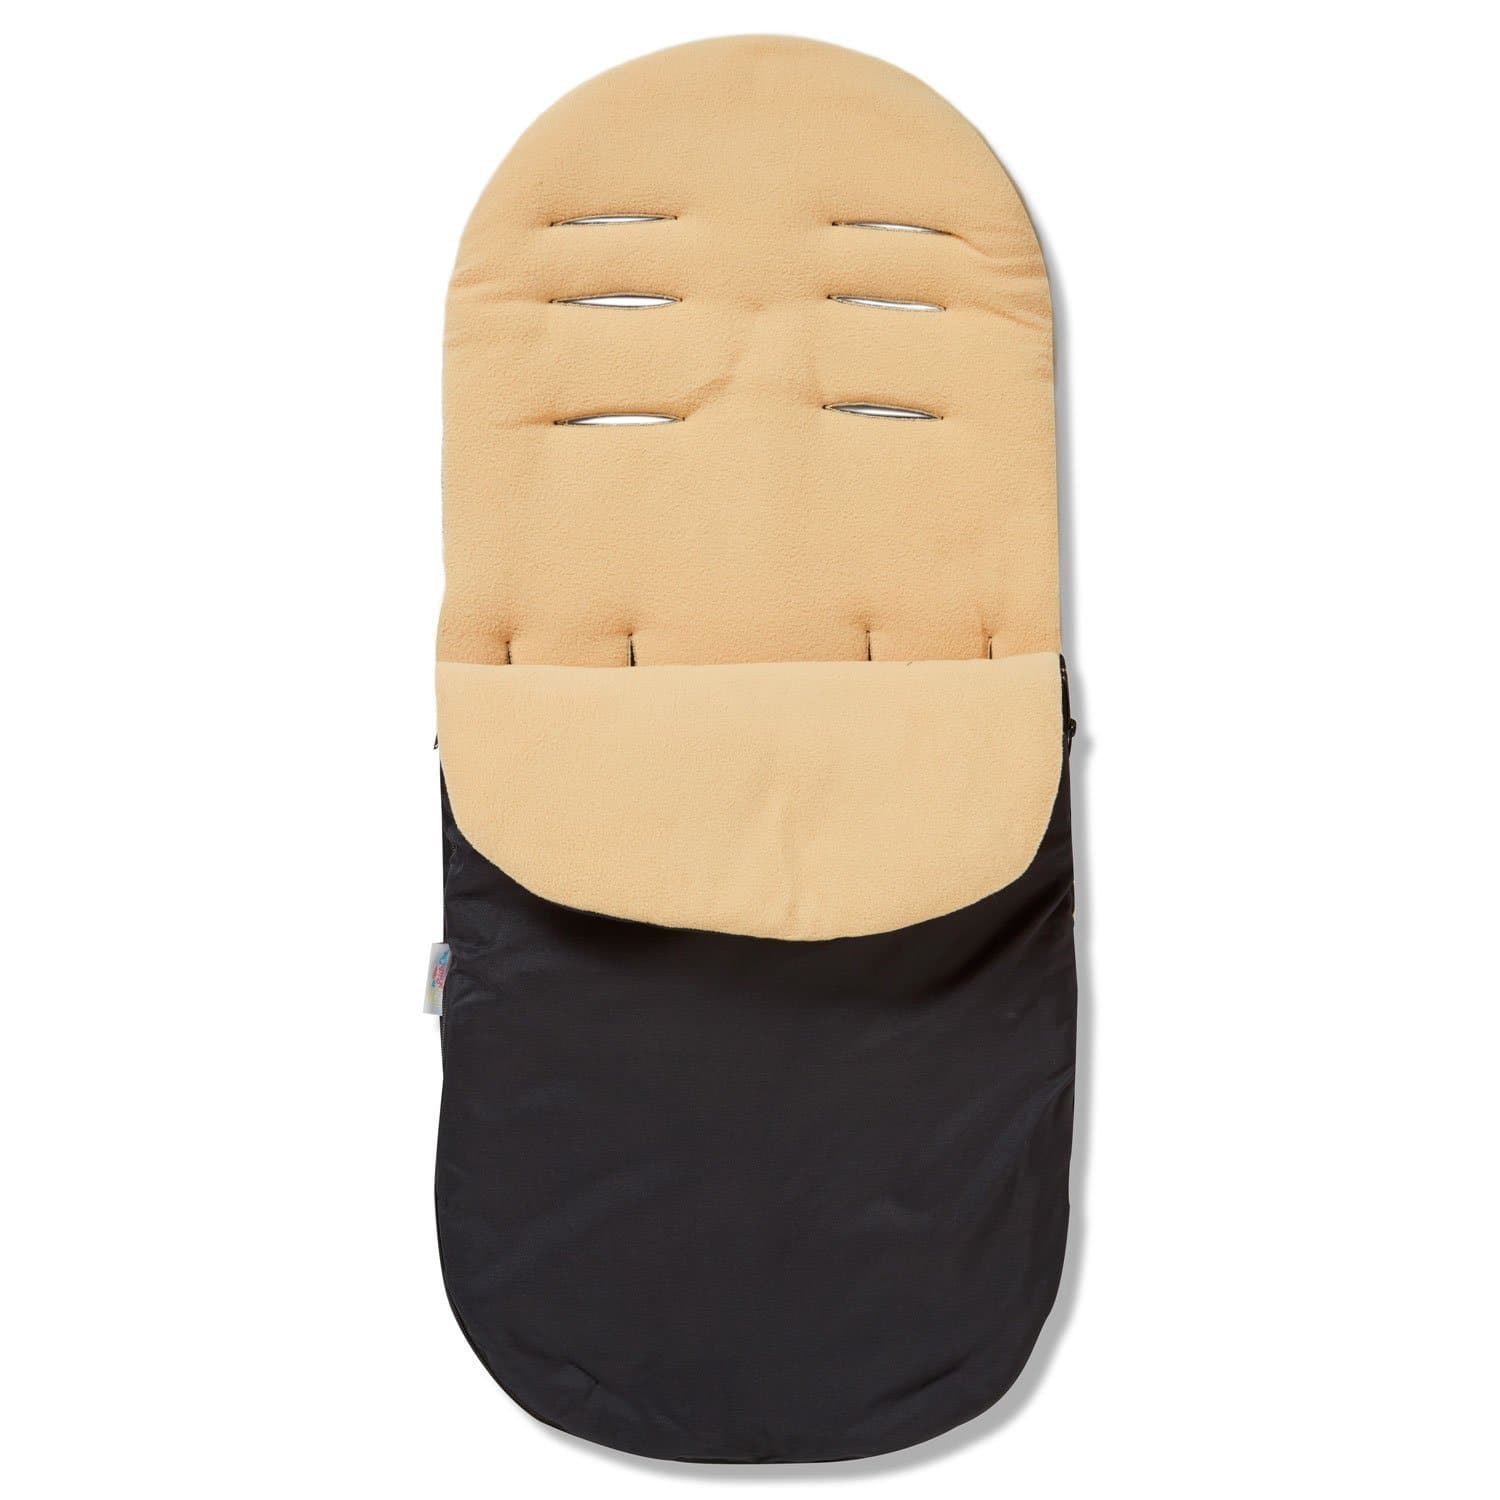 Footmuff / Cosy Toes Compatible with BabyDan - For Your Little One